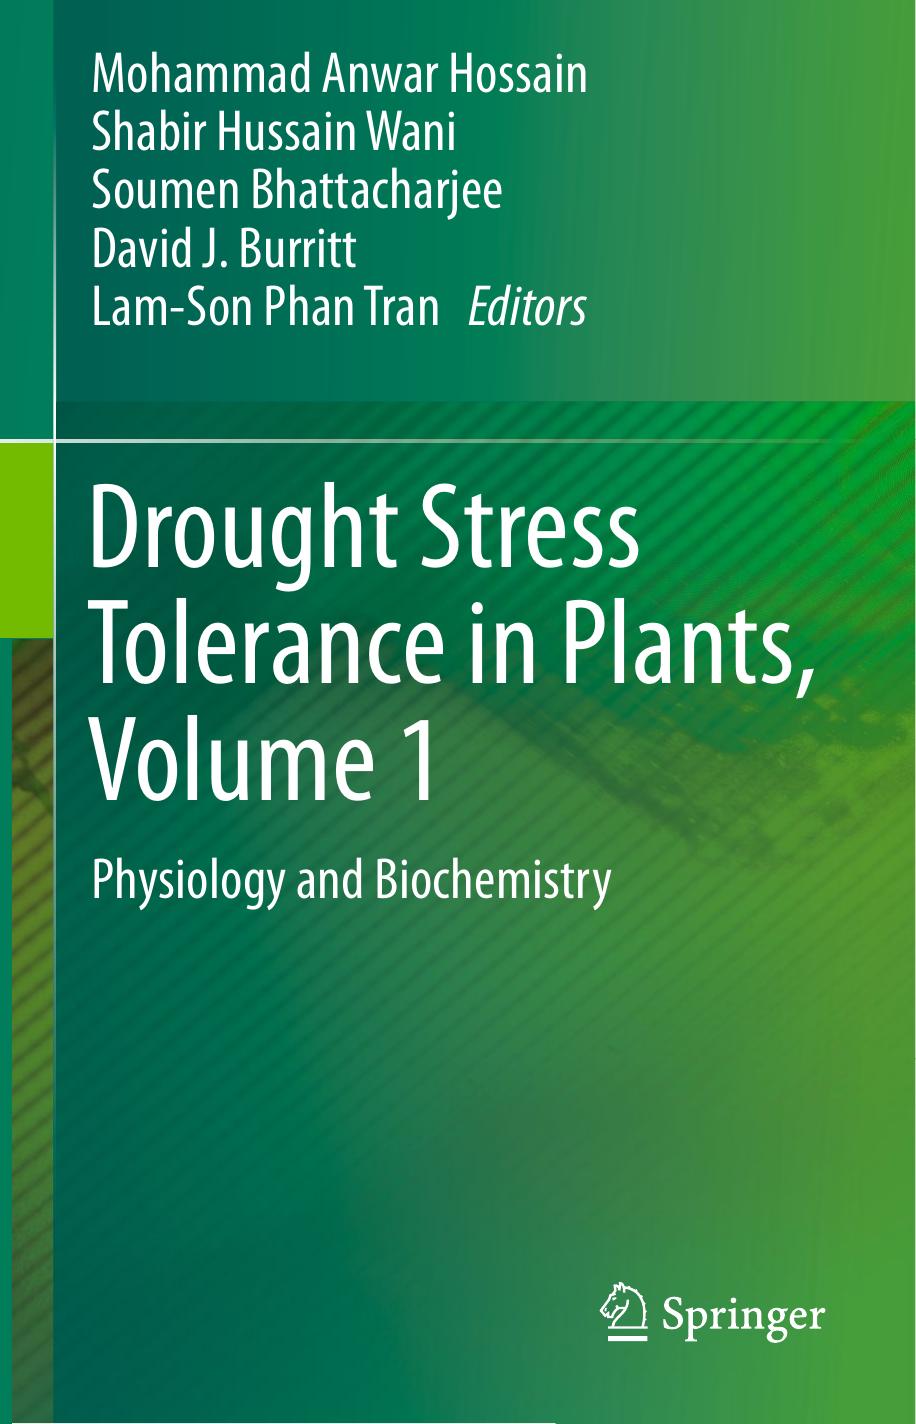 Drought Stress Tolerance in Plants, Vol 1  Physiology and Biochemistry 2016